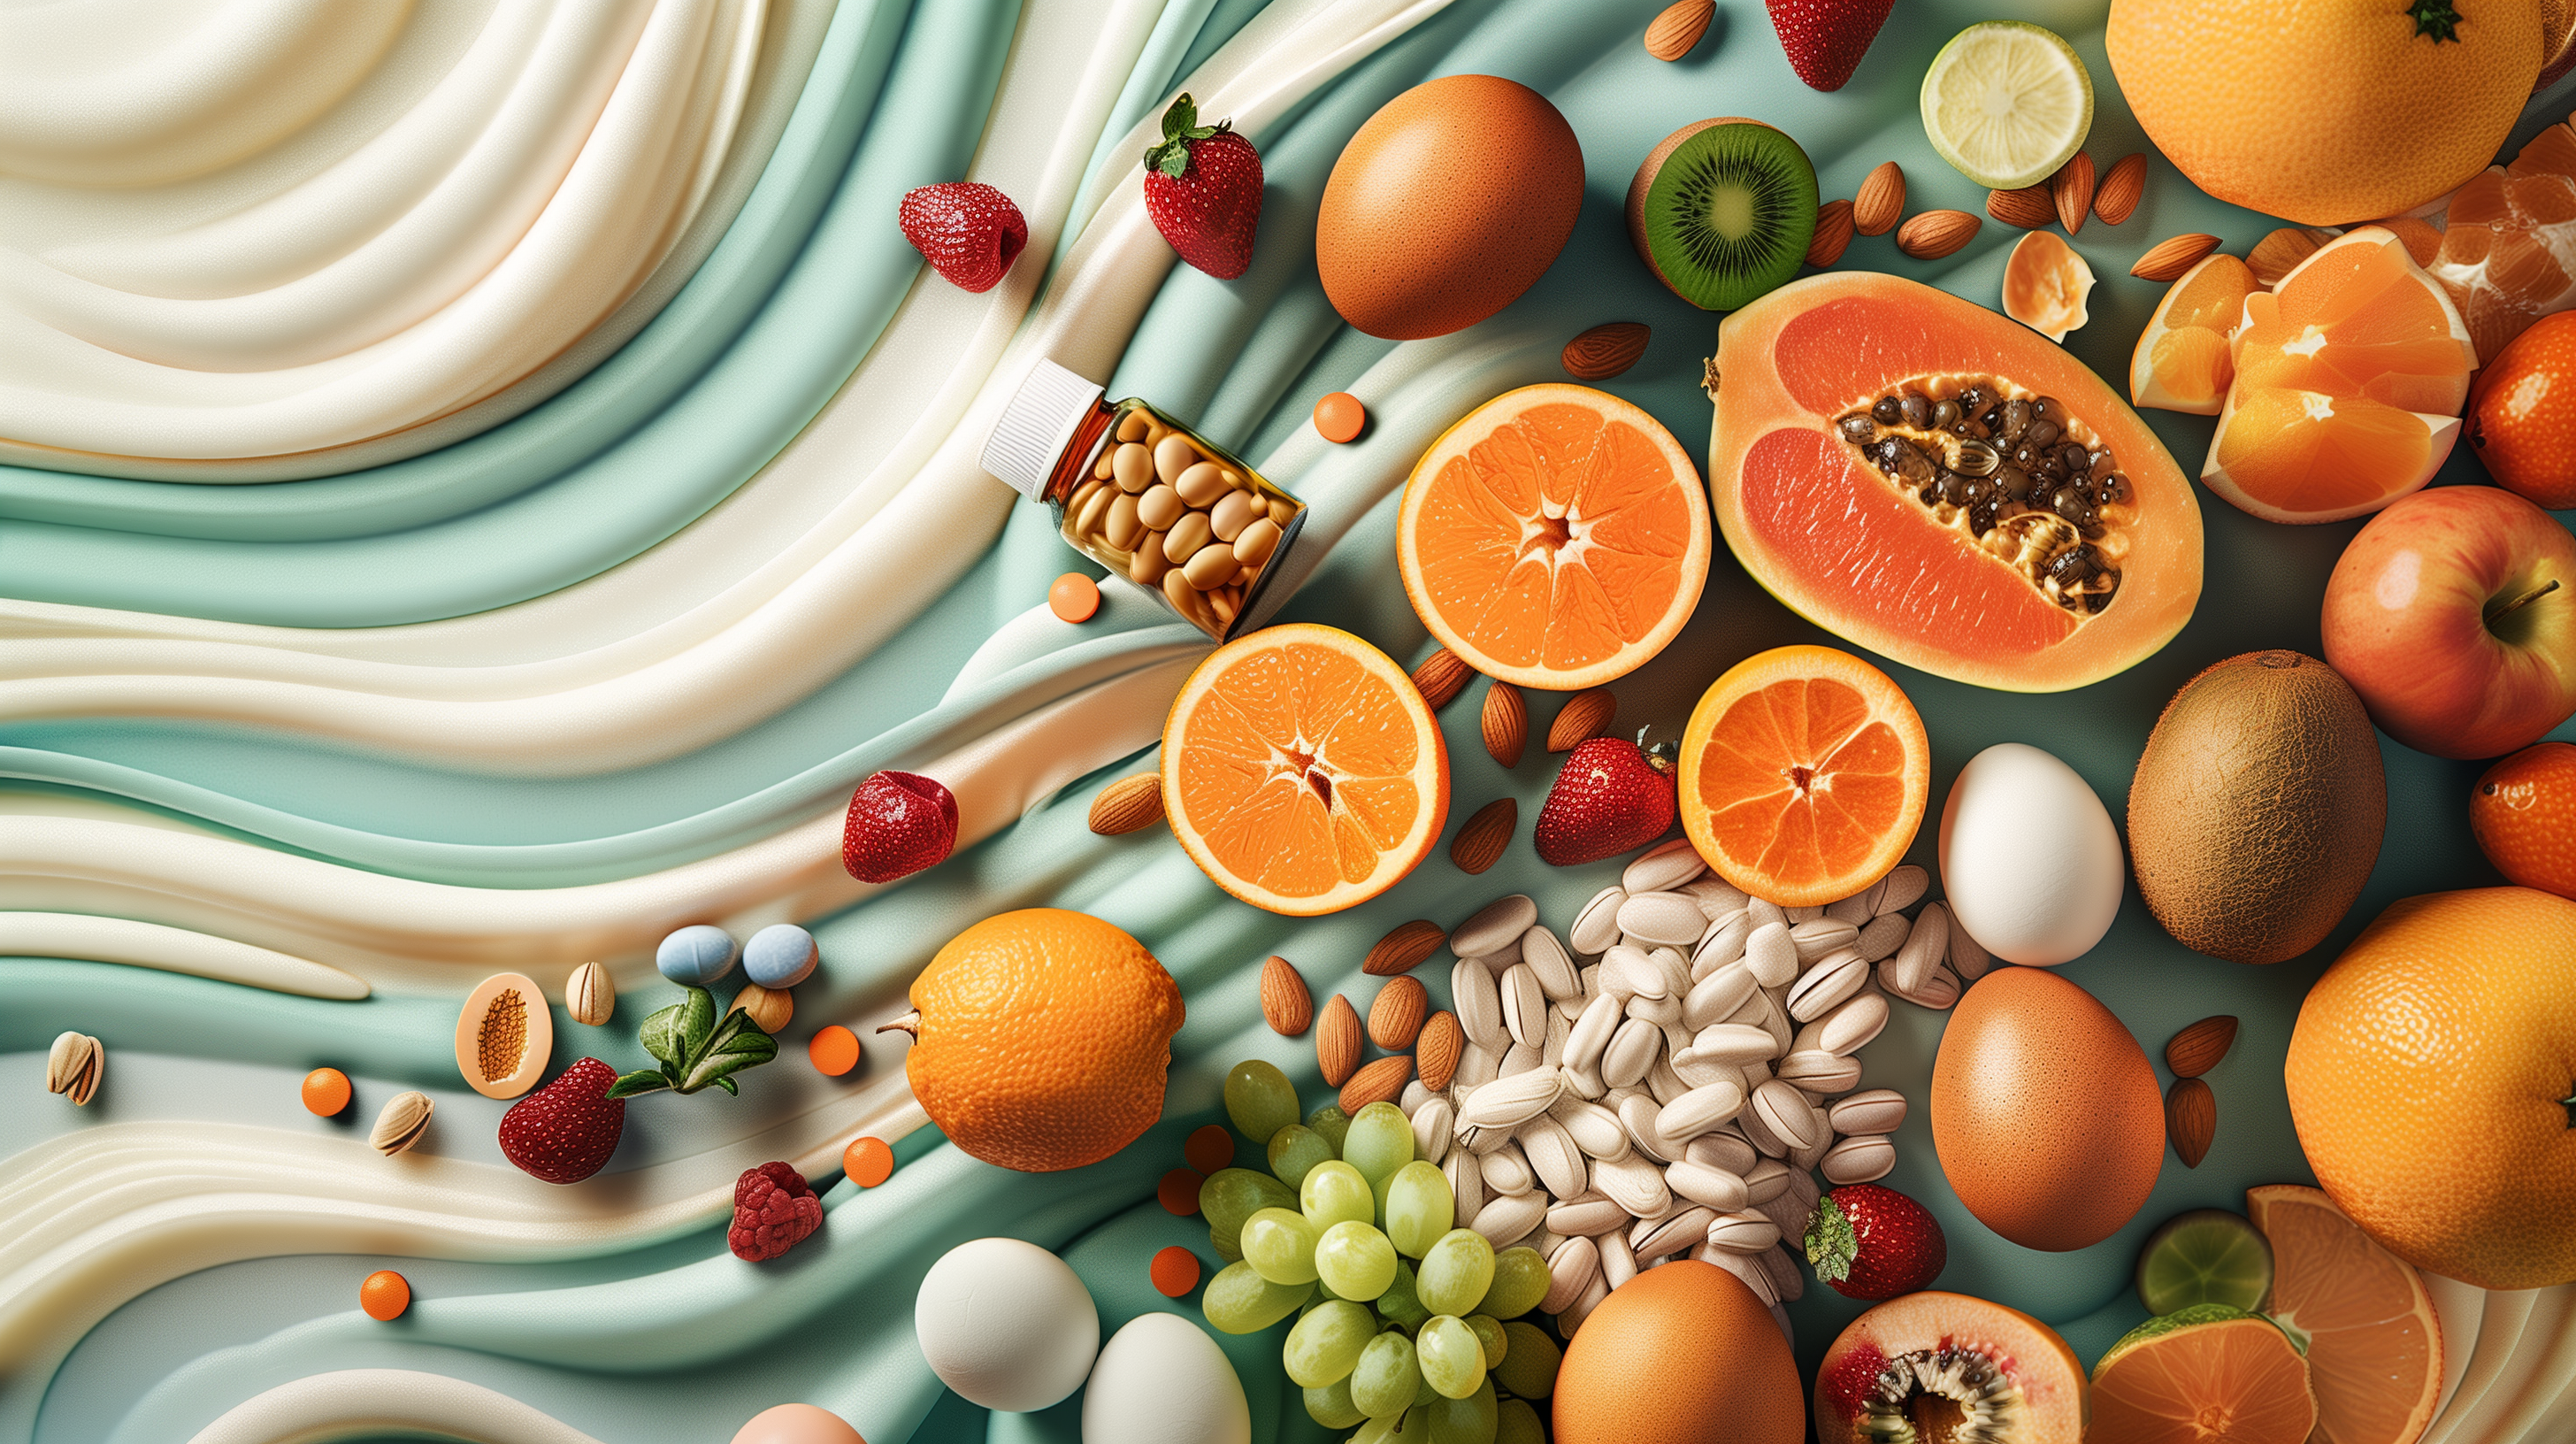 colorful array of fruits, nuts, and eggs, with a prominent, centrally placed bottle of biotin supplement